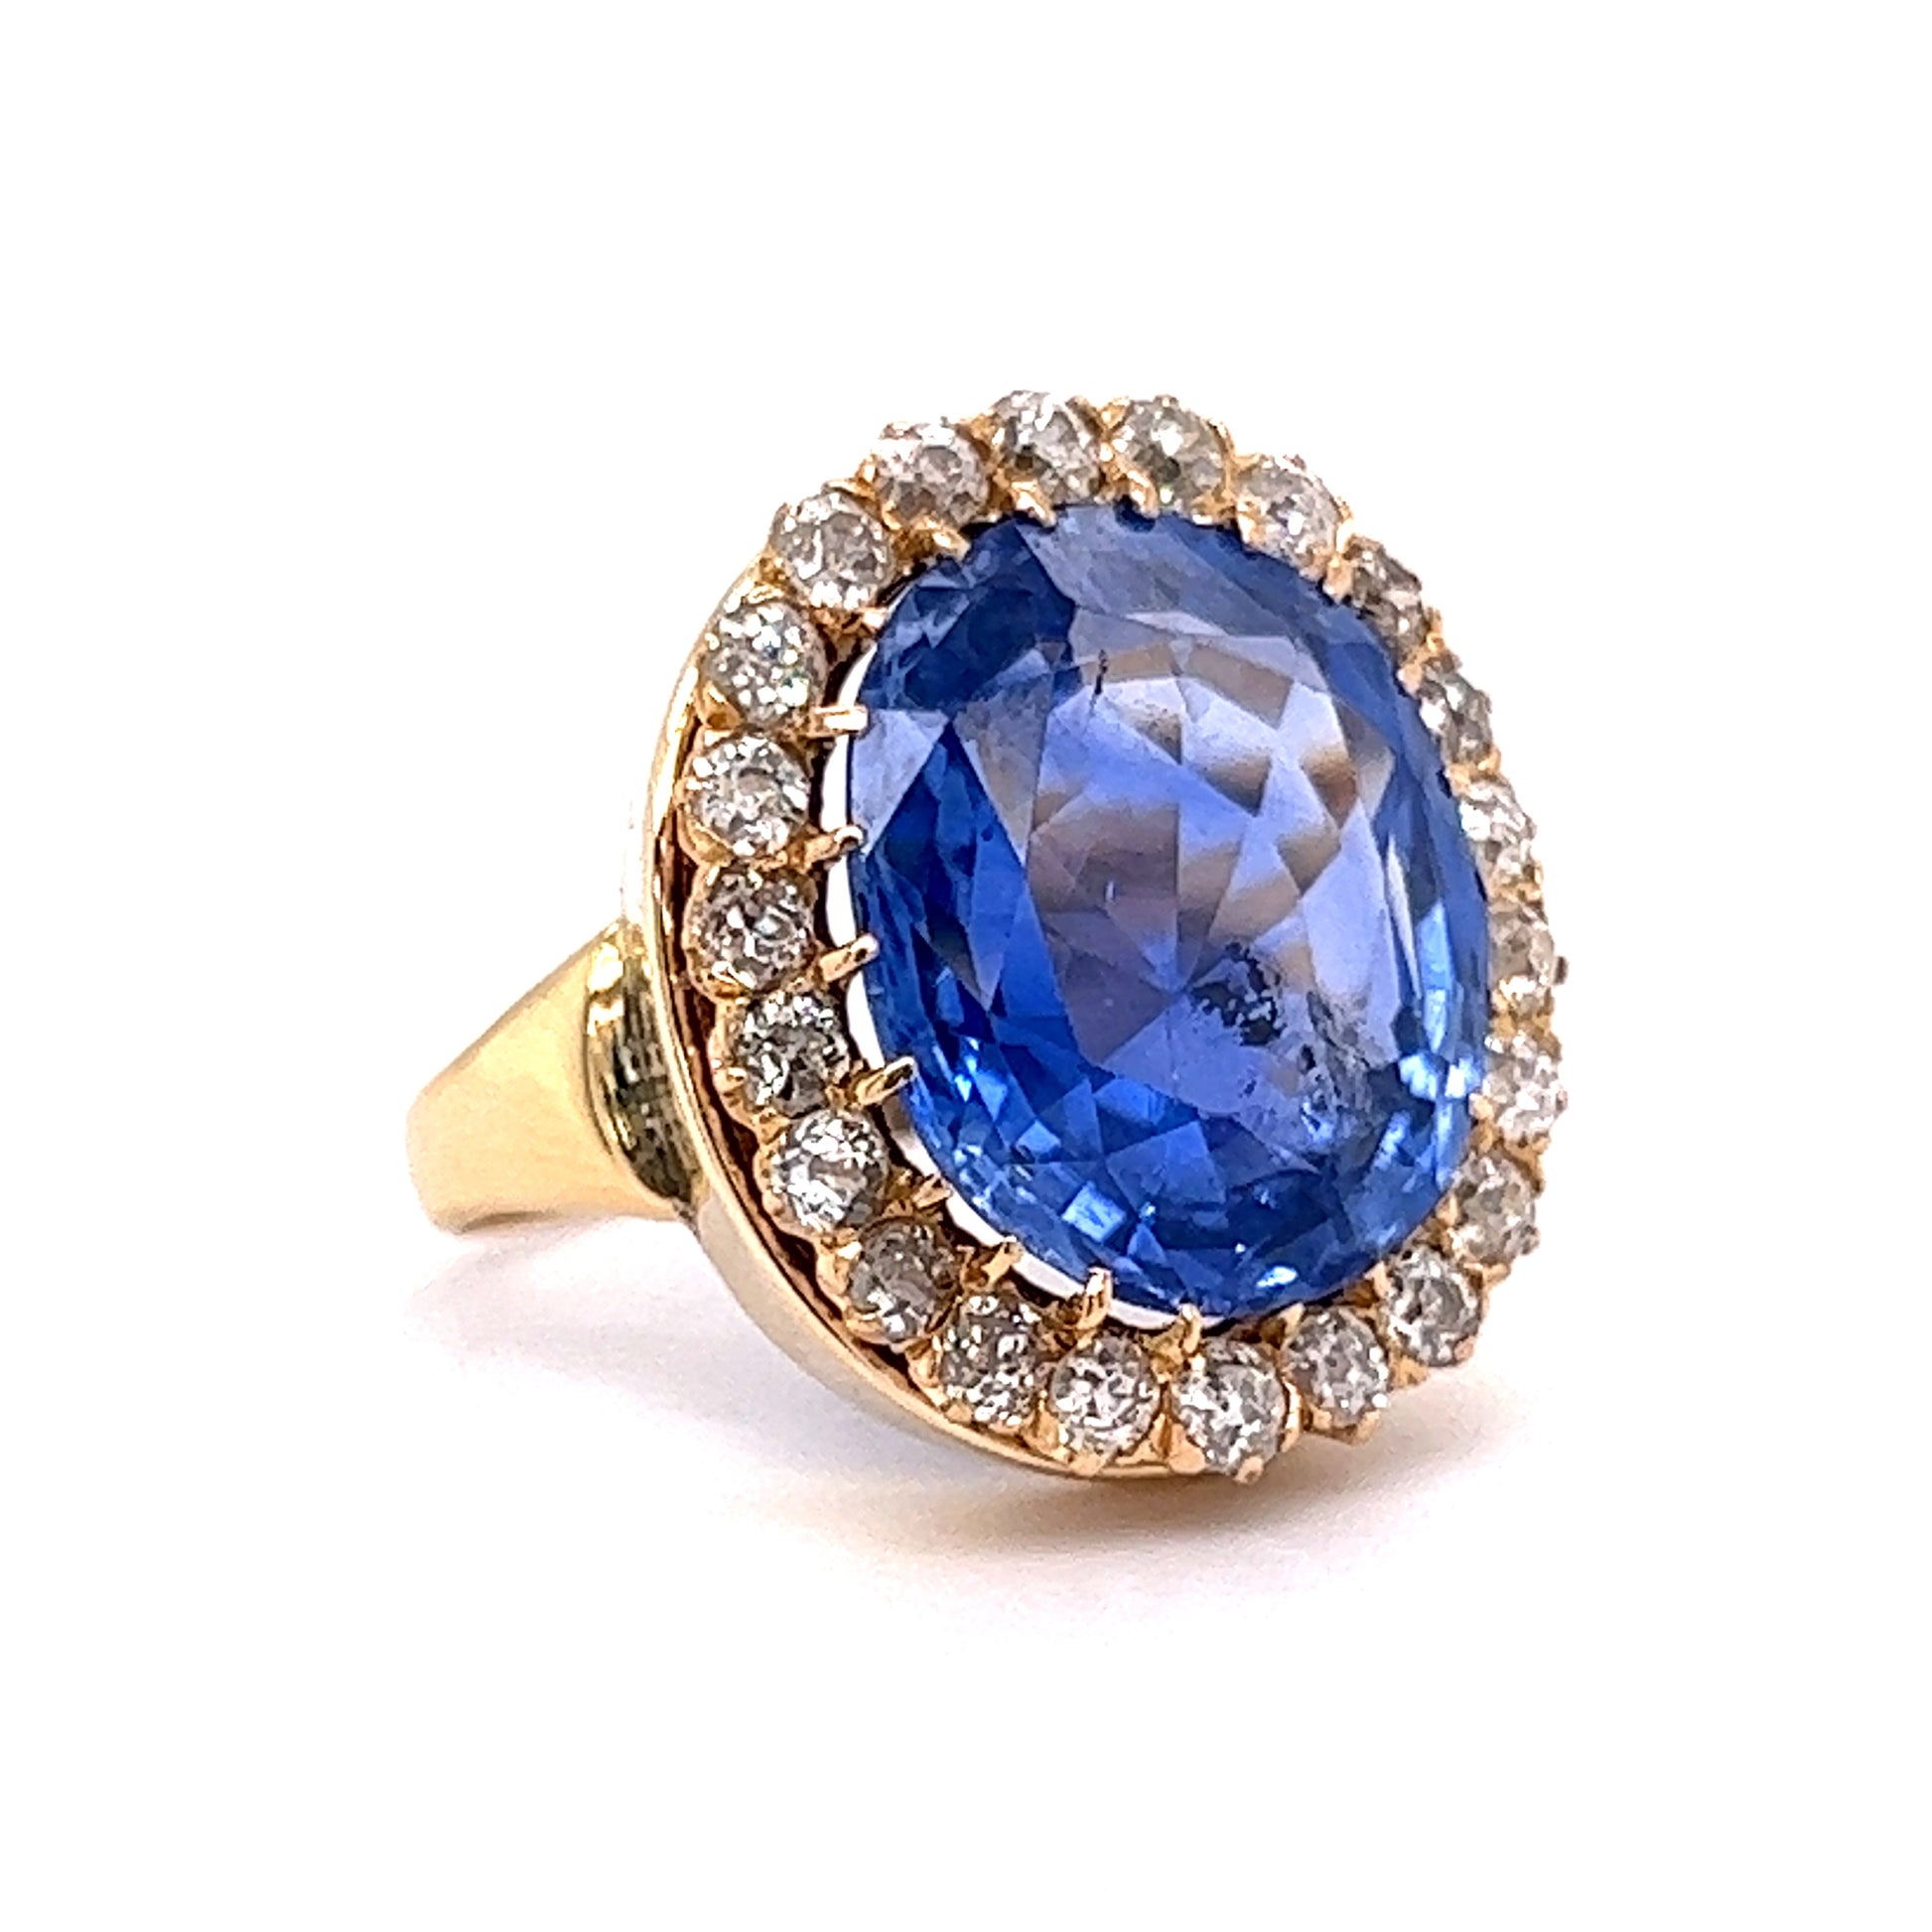 Victorian Ceylon Sapphire & Diamond Cocktail Ring in 18kComposition: 18 Karat Yellow Gold Ring Size: 6.25 Total Diamond Weight: 1.32ct Total Gram Weight: 7.6 g